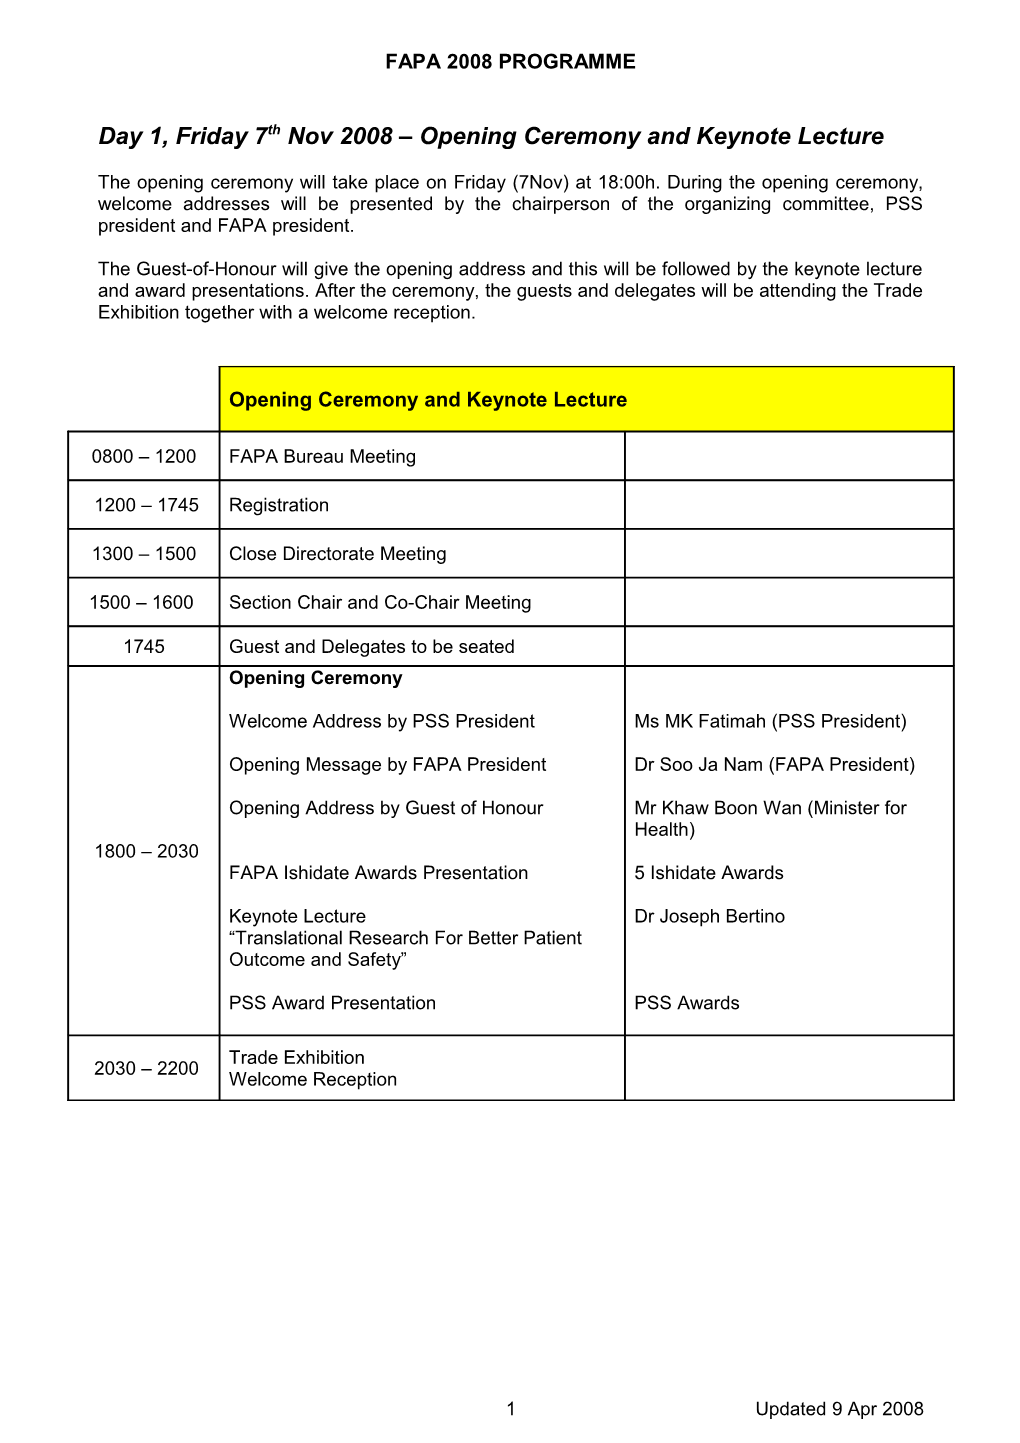 Proposed Draft Programme for Fapa 2008